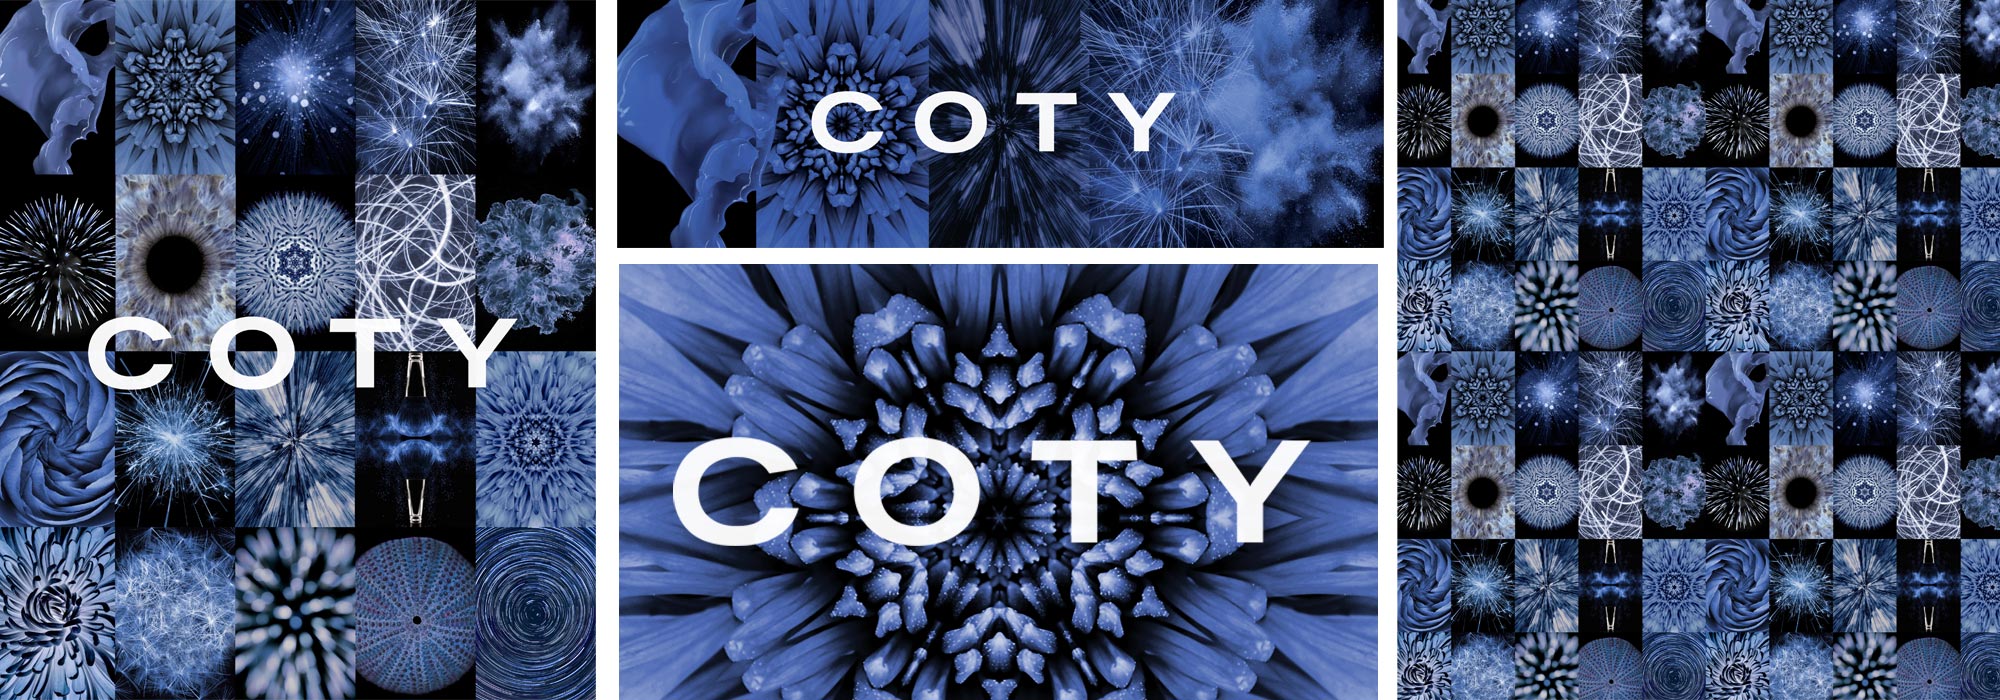 Coty branding and design by MPAKT